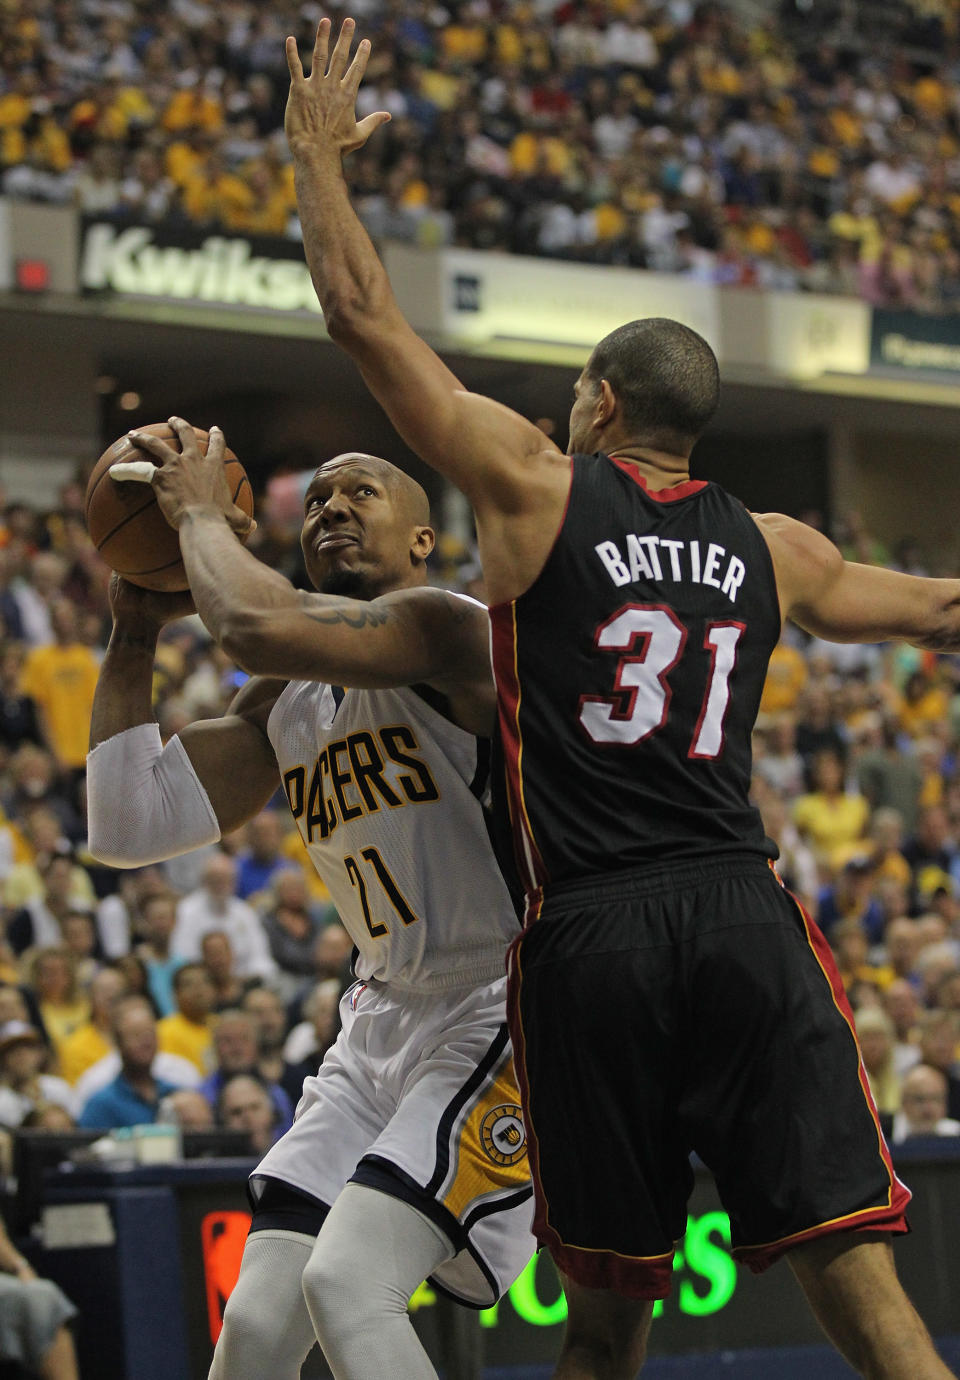 Miami Heat v Indiana Pacers - Game Four